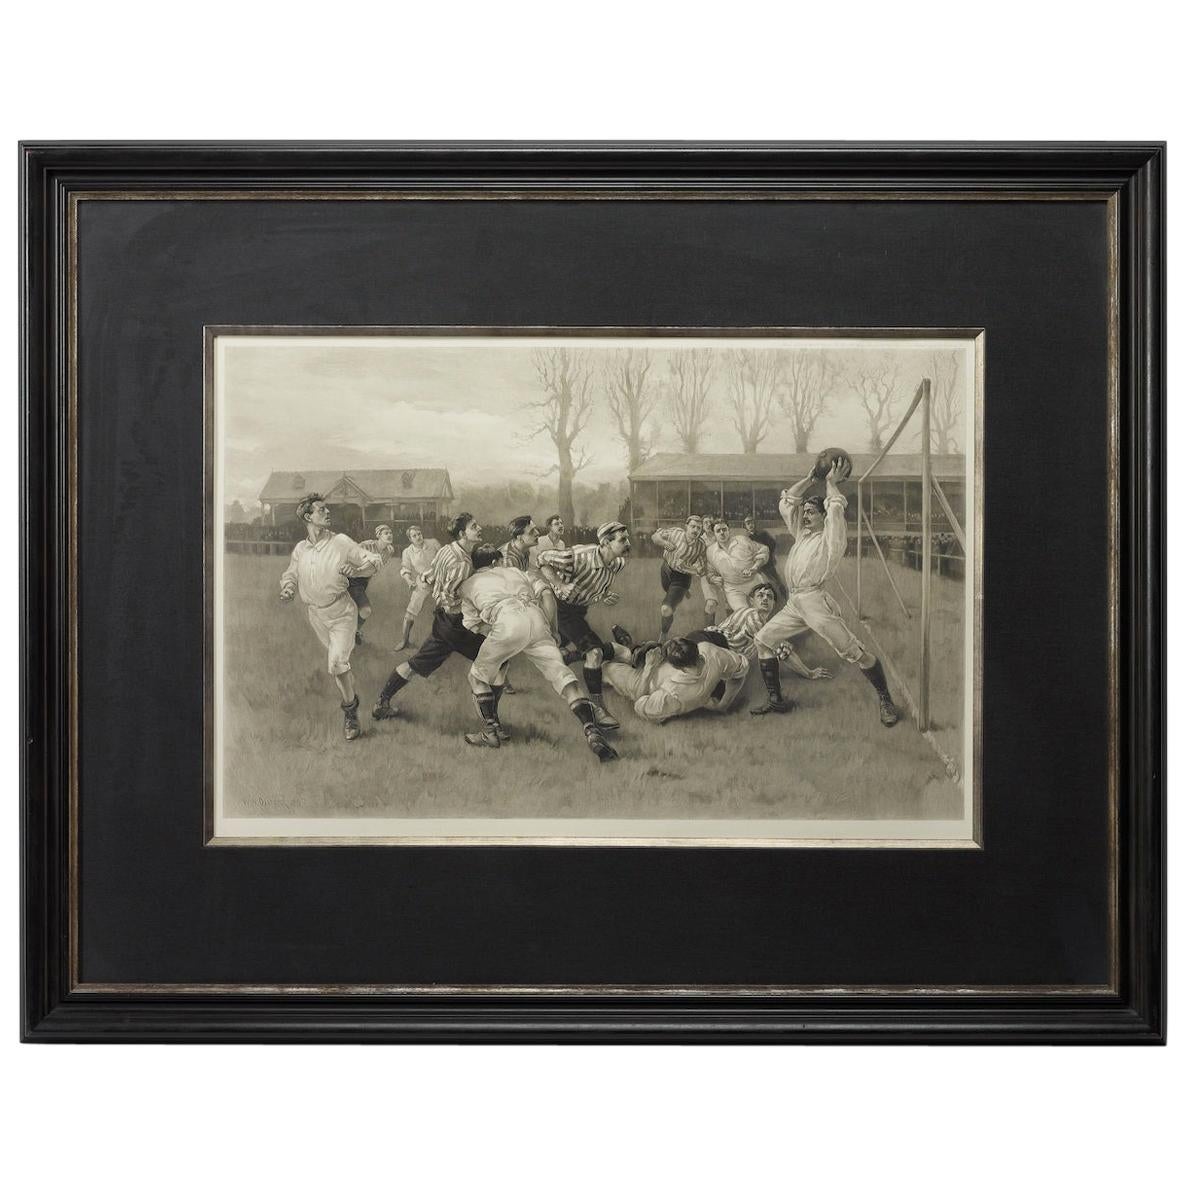 1891 Football Match and Association Game after W. Overend, Antique Photogravure